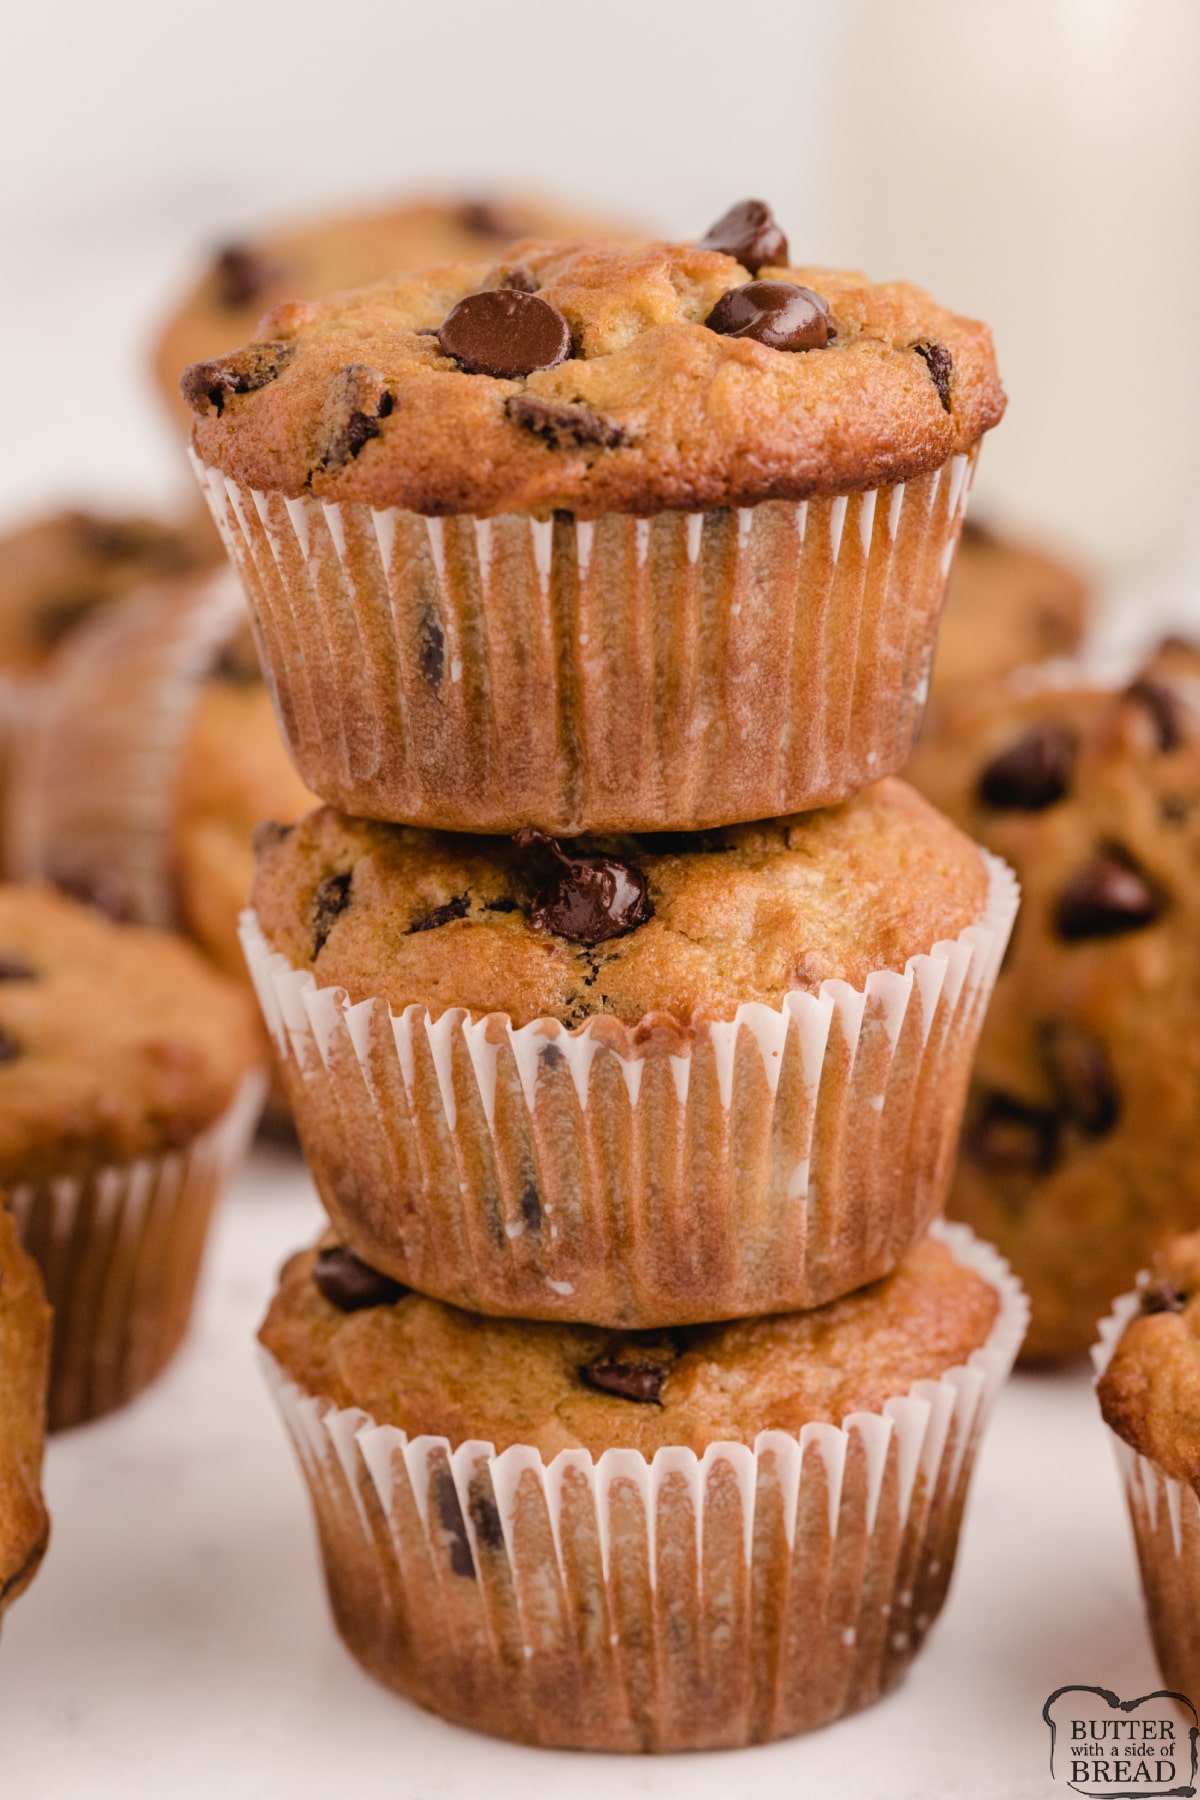 Buttermilk muffin recipe with oats and chocolate chips